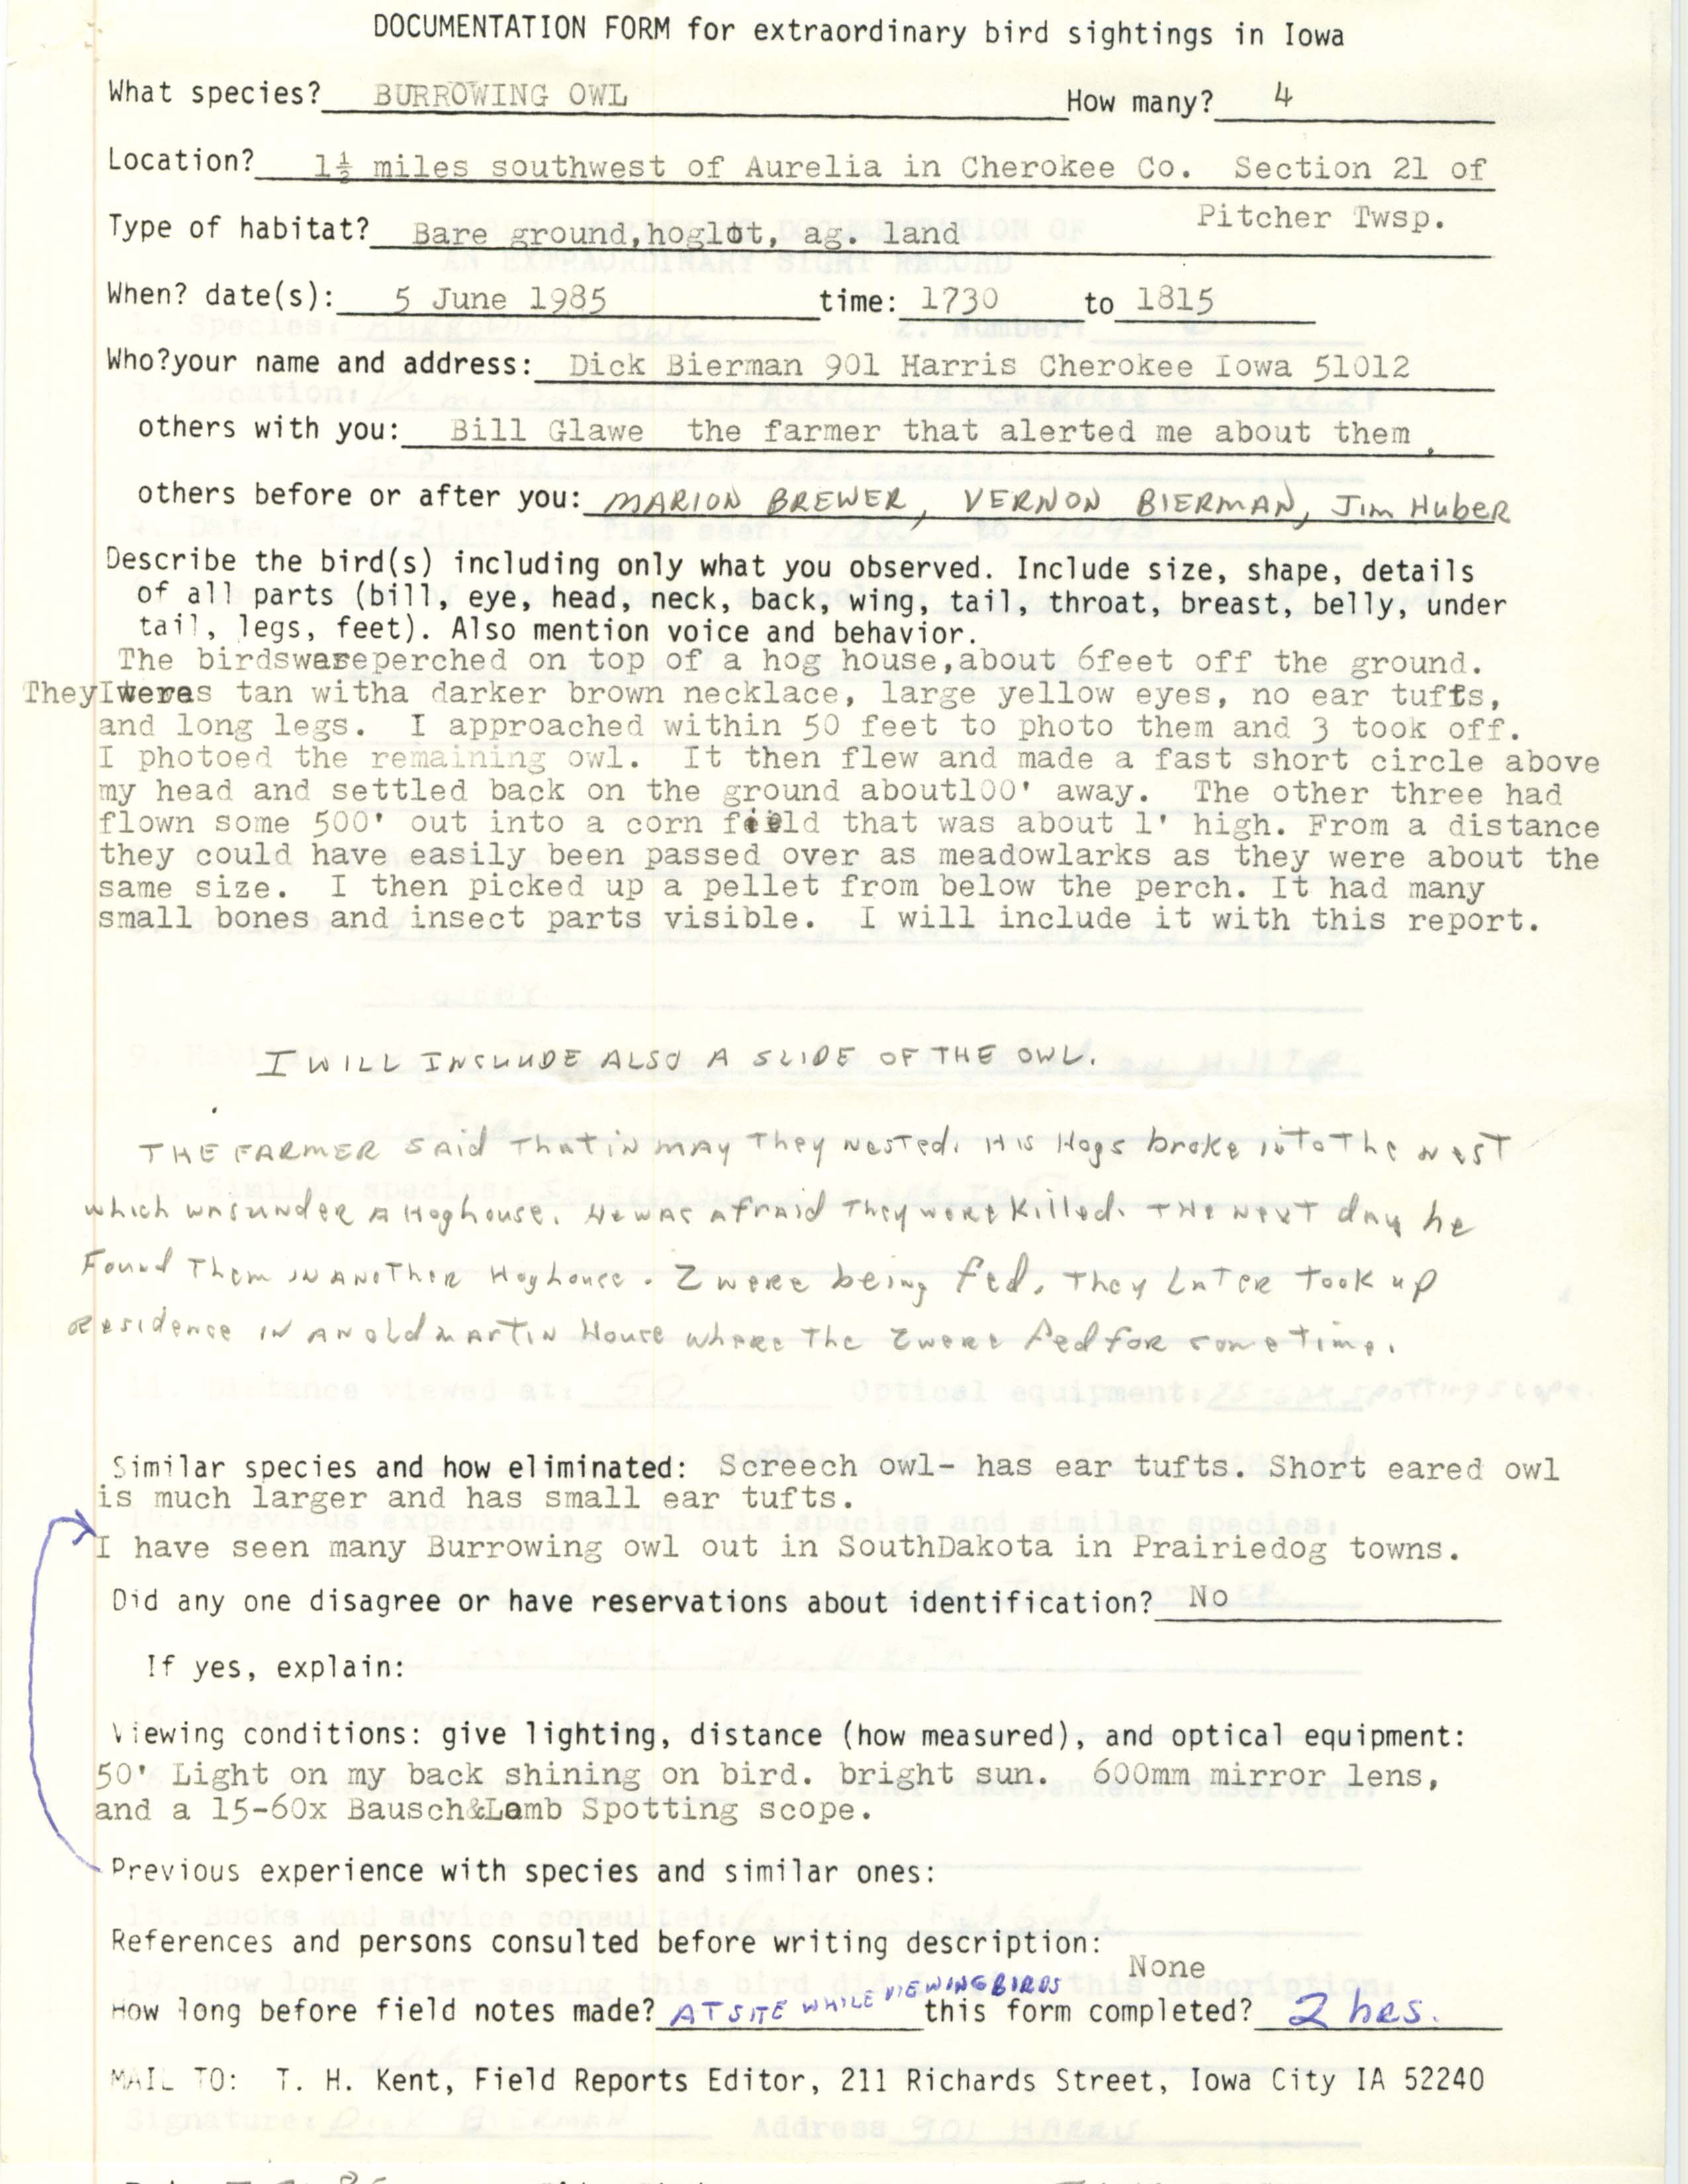 Rare bird documentation form for Burrowing Owl at Pitcher Township in Cherokee County, 1985